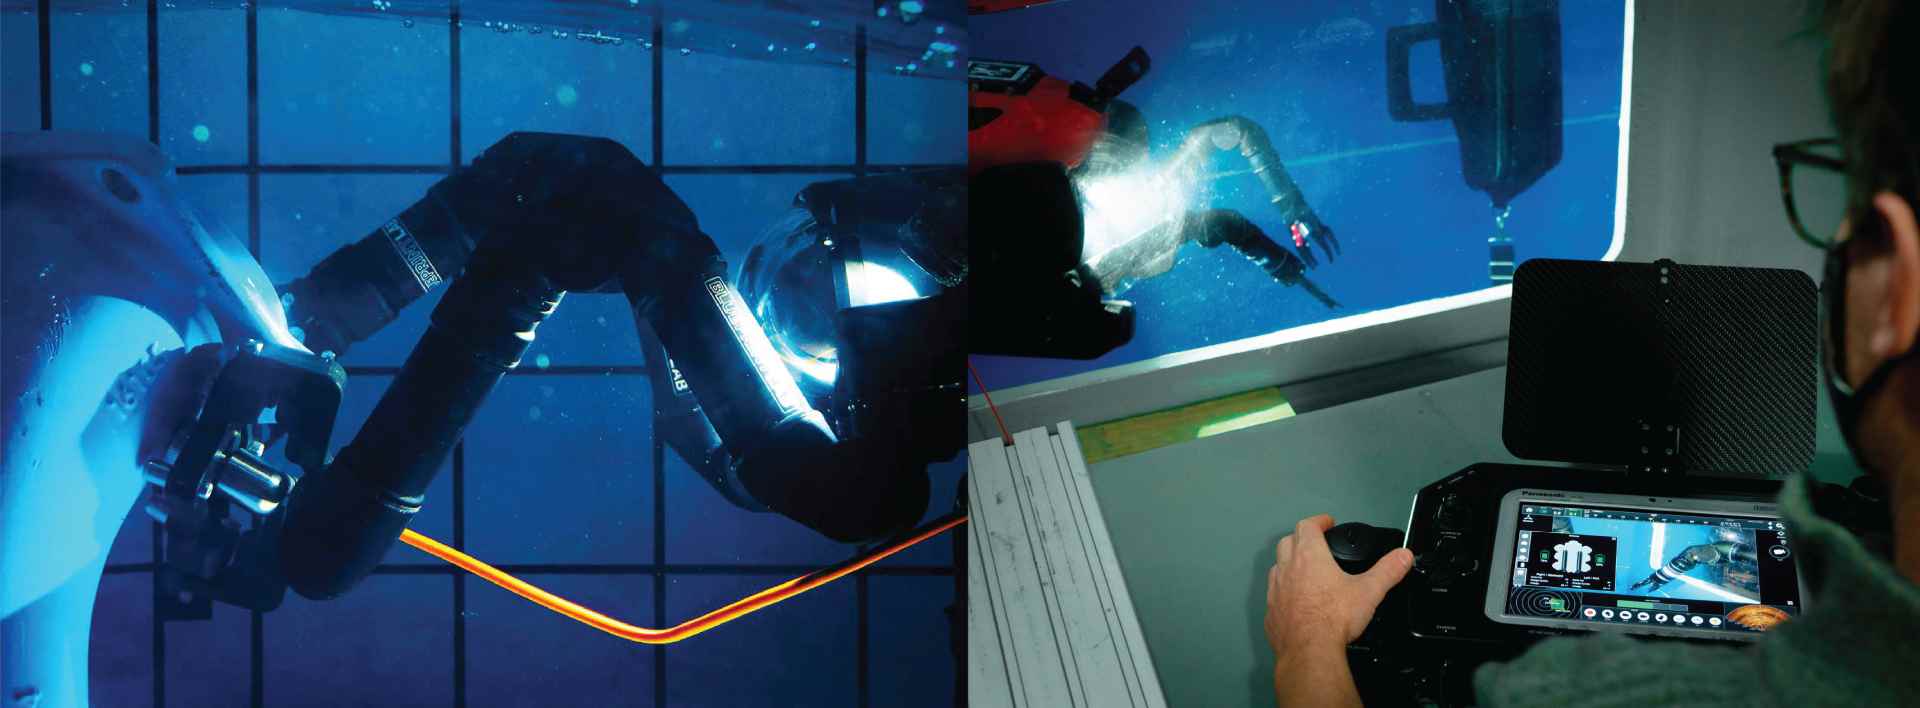 robotic arms being tested underwater